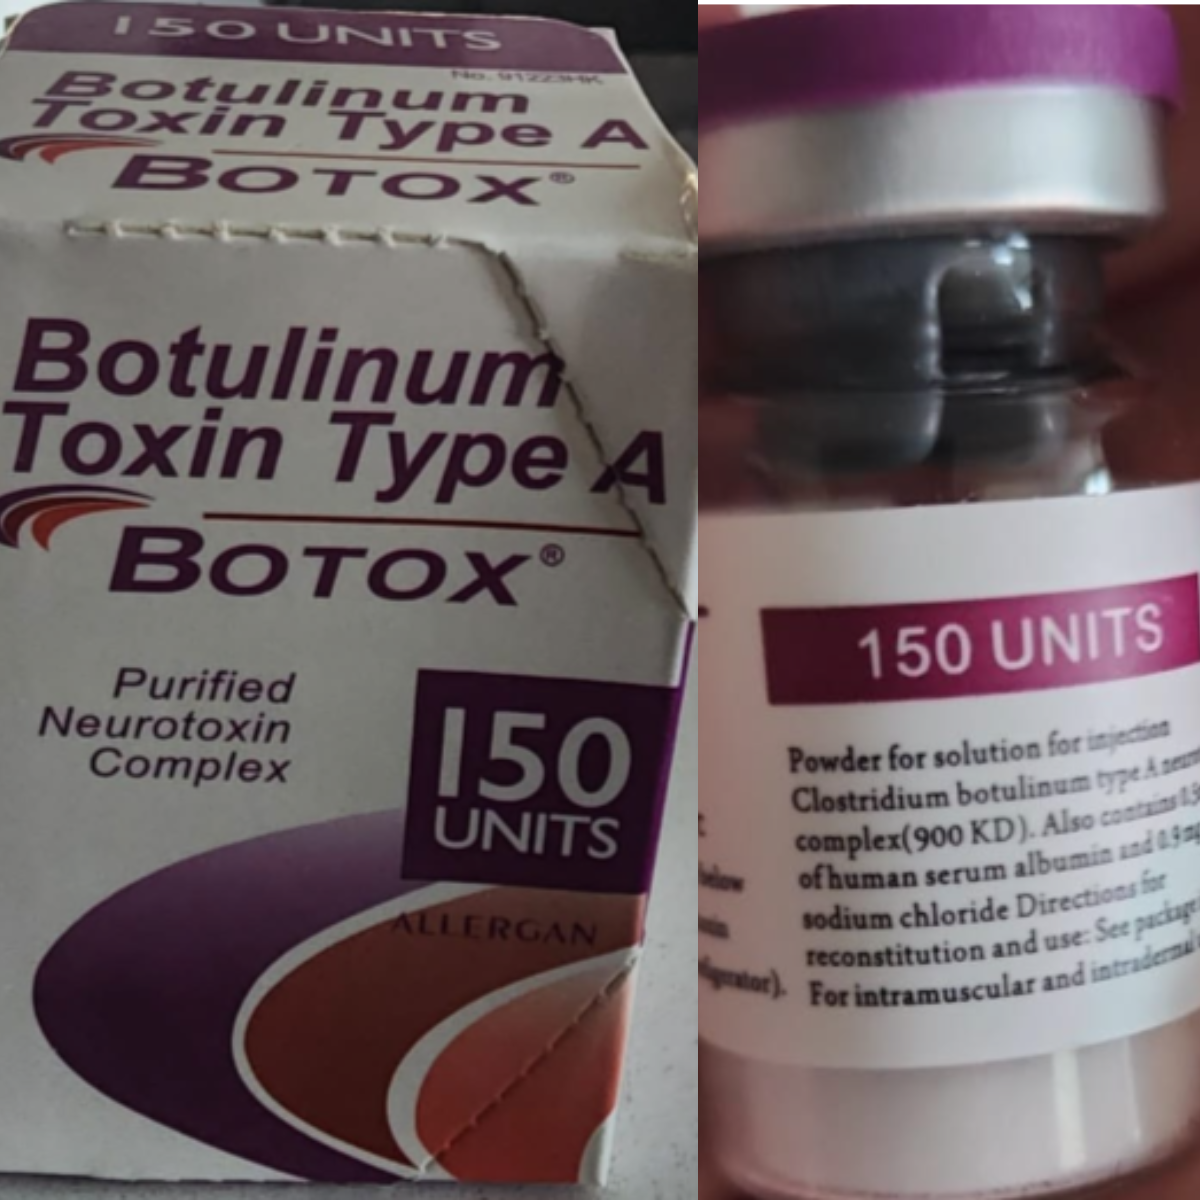 FDA Issues Alert on Counterfeit Botox: What Dermatology Clinicians Need to Know